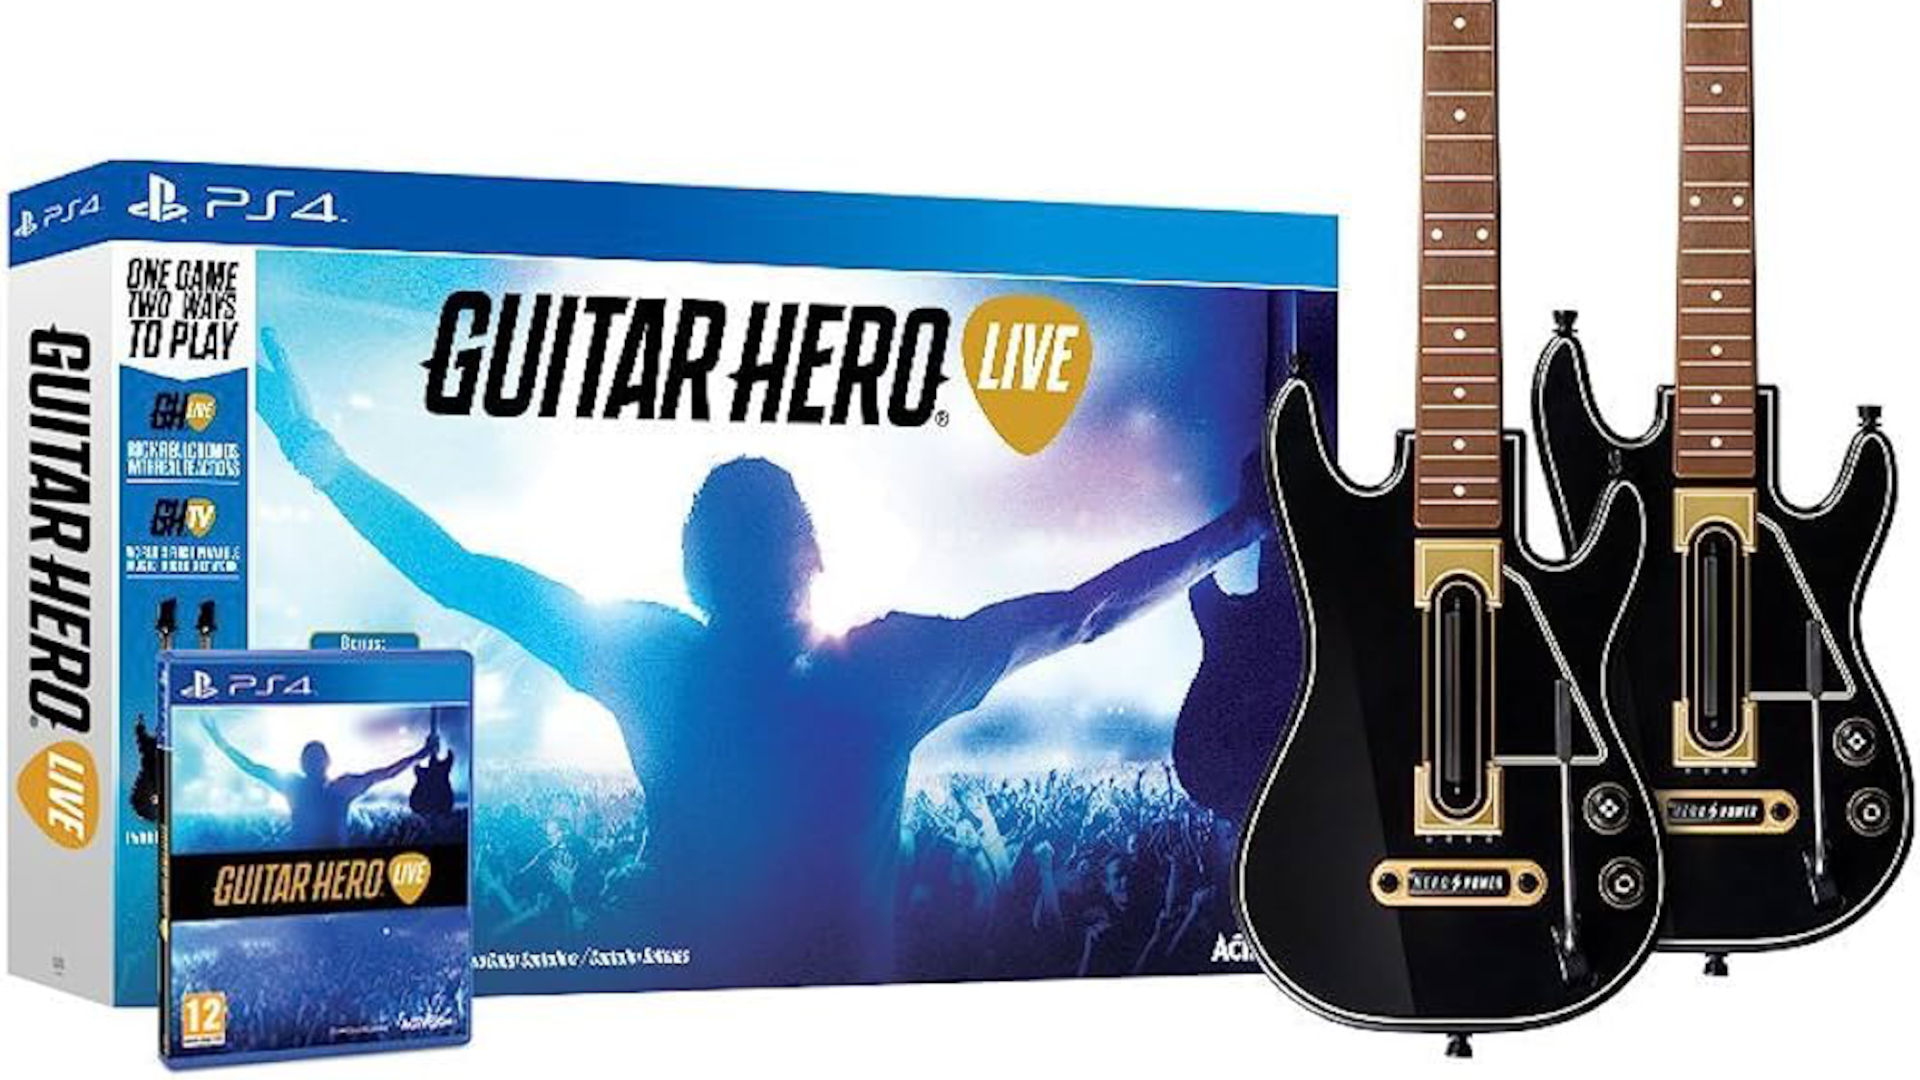 A New Guitar Hero is Reportedly in the Works at Activision